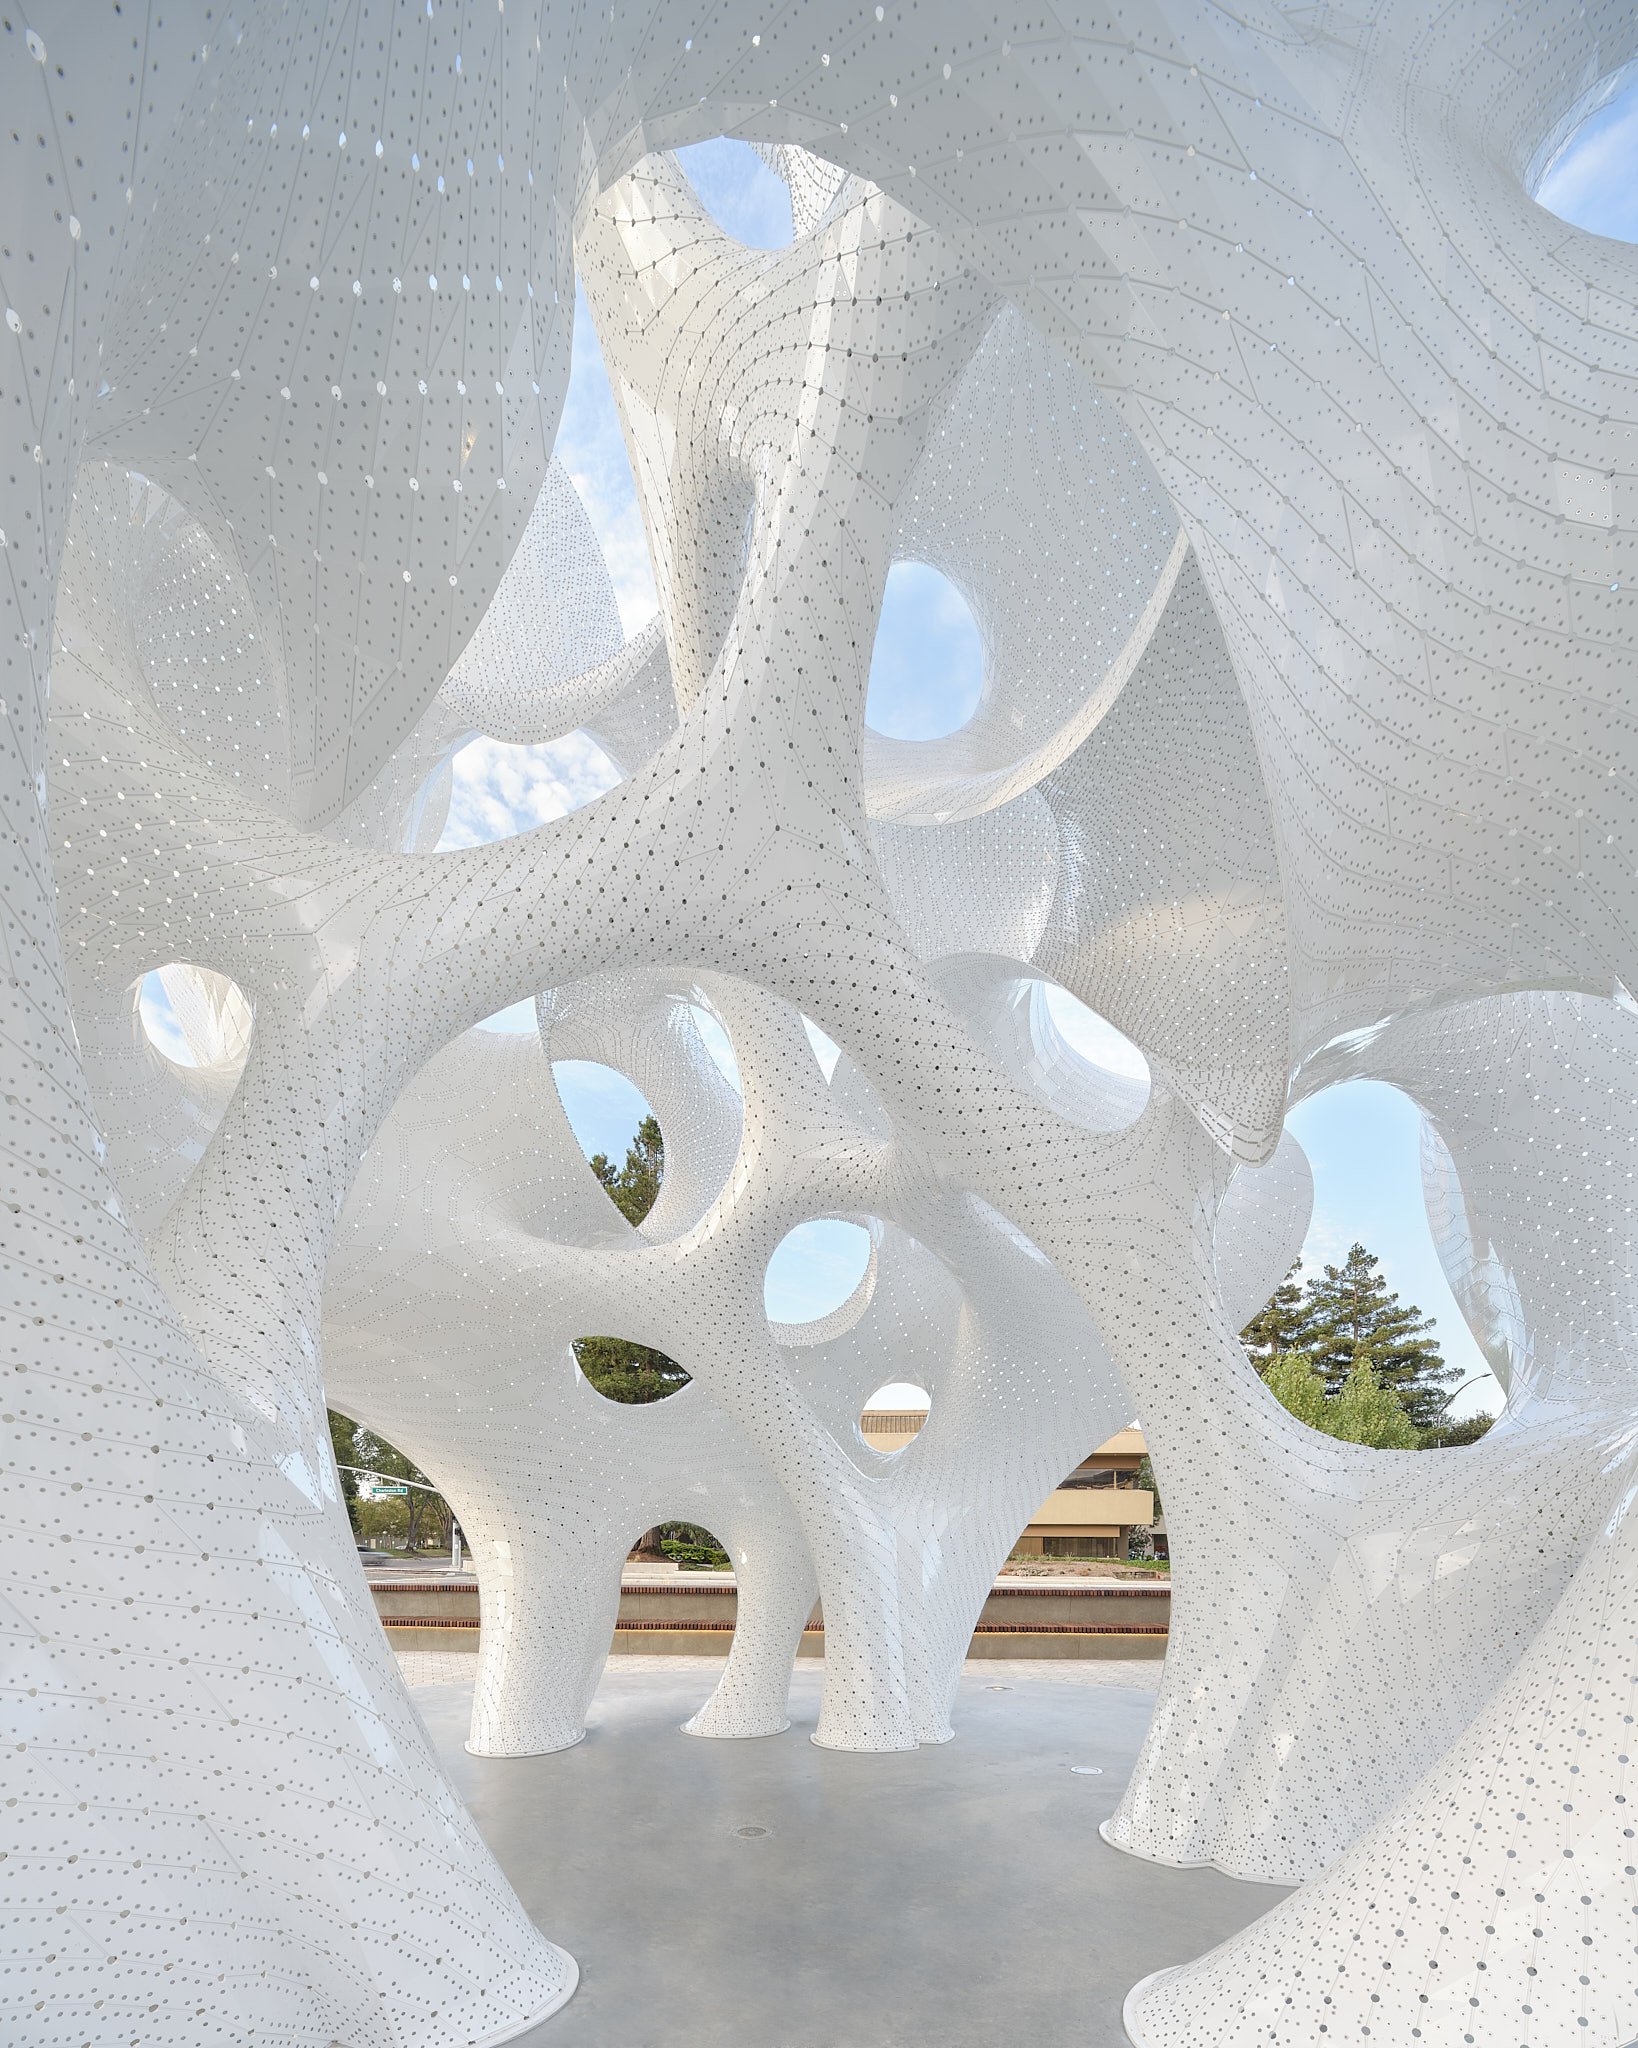 THE ORB, GOOGLE CAMPUS — MARC FORNES / THEVERYMANY